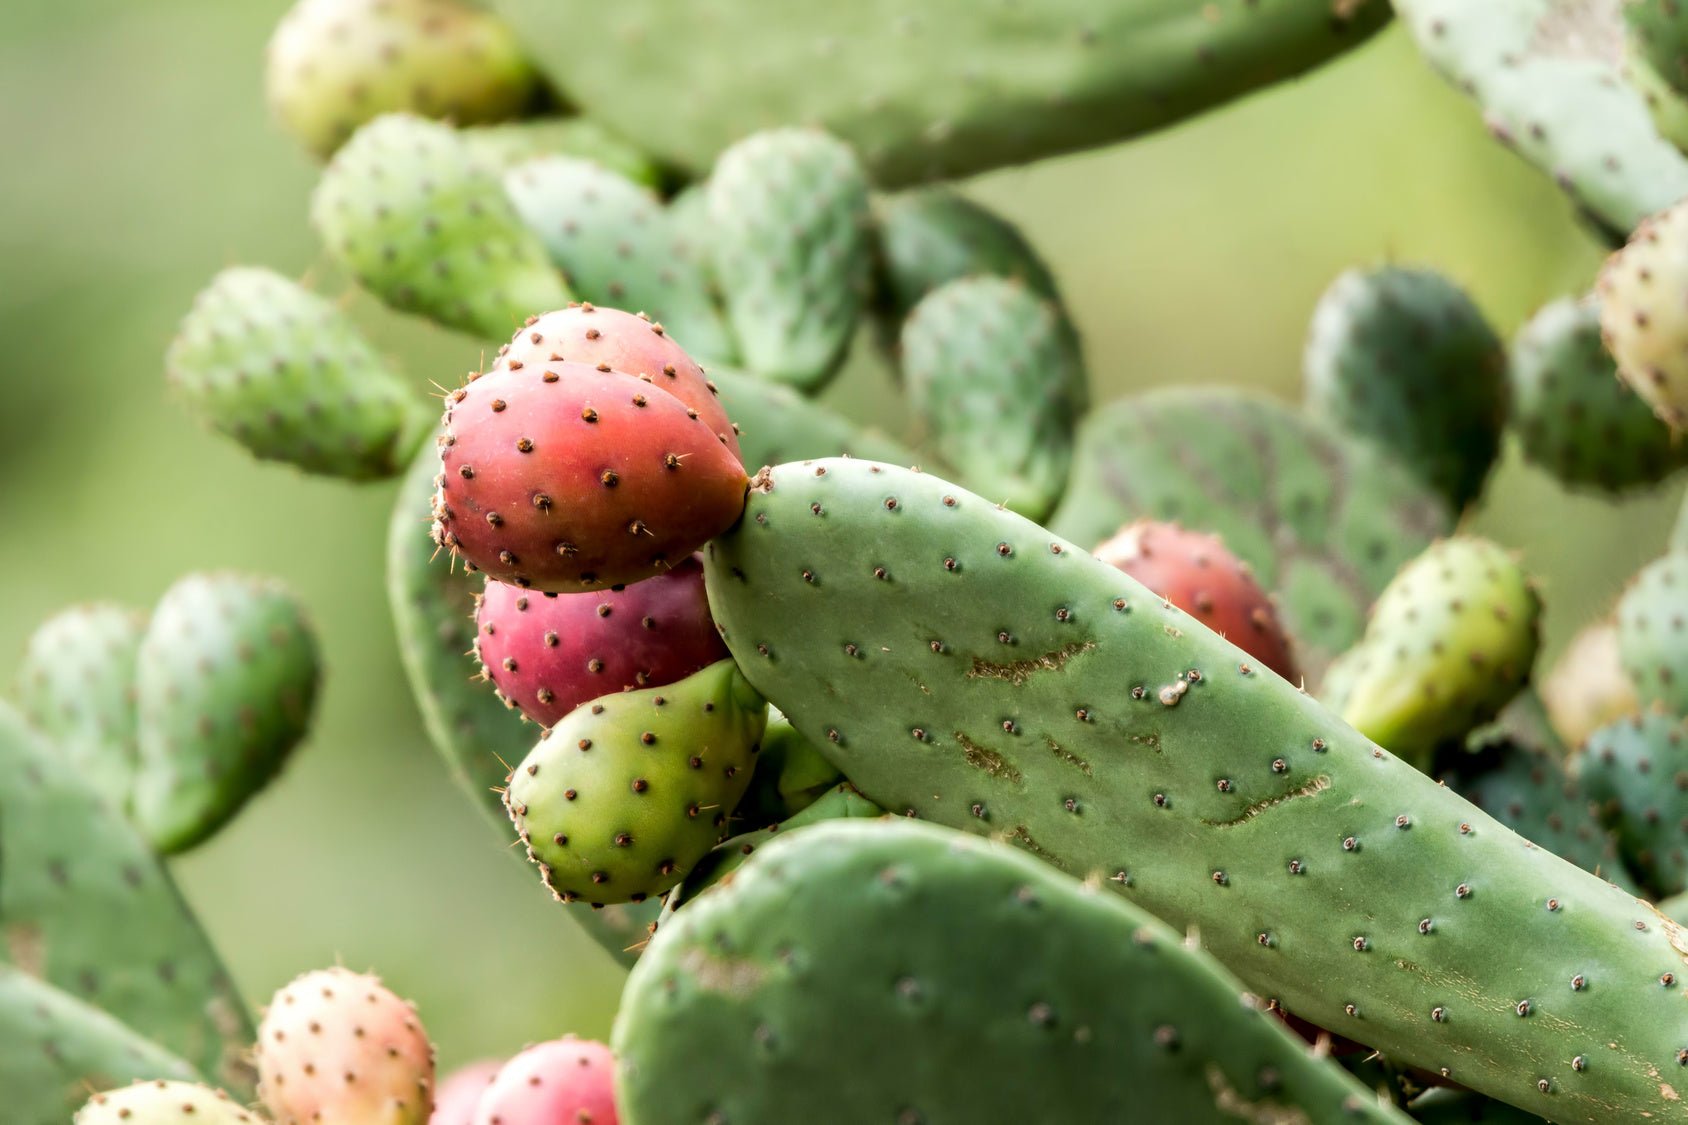 Prickly Pear Seed Oil Skin Benefits - Why Your Skin Will Love It! - Indagare Natural Beauty